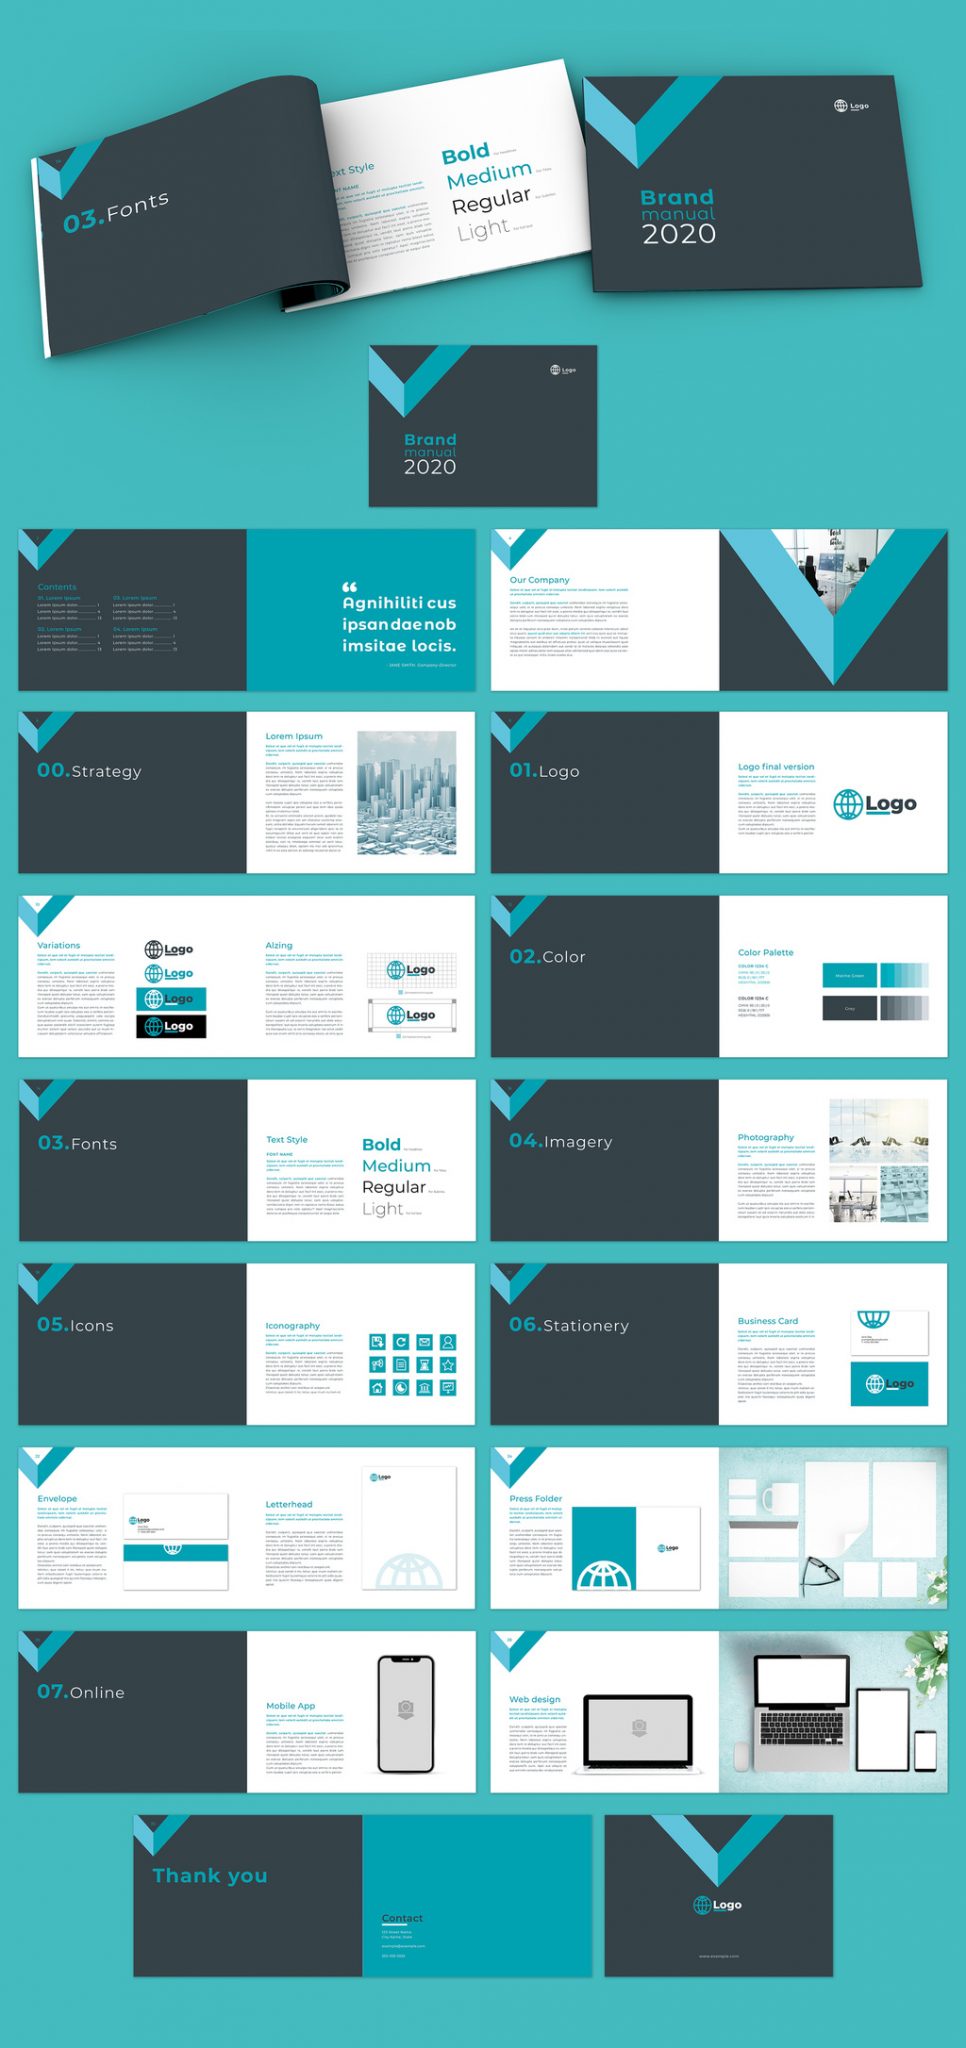 Indesign Templates Free Download